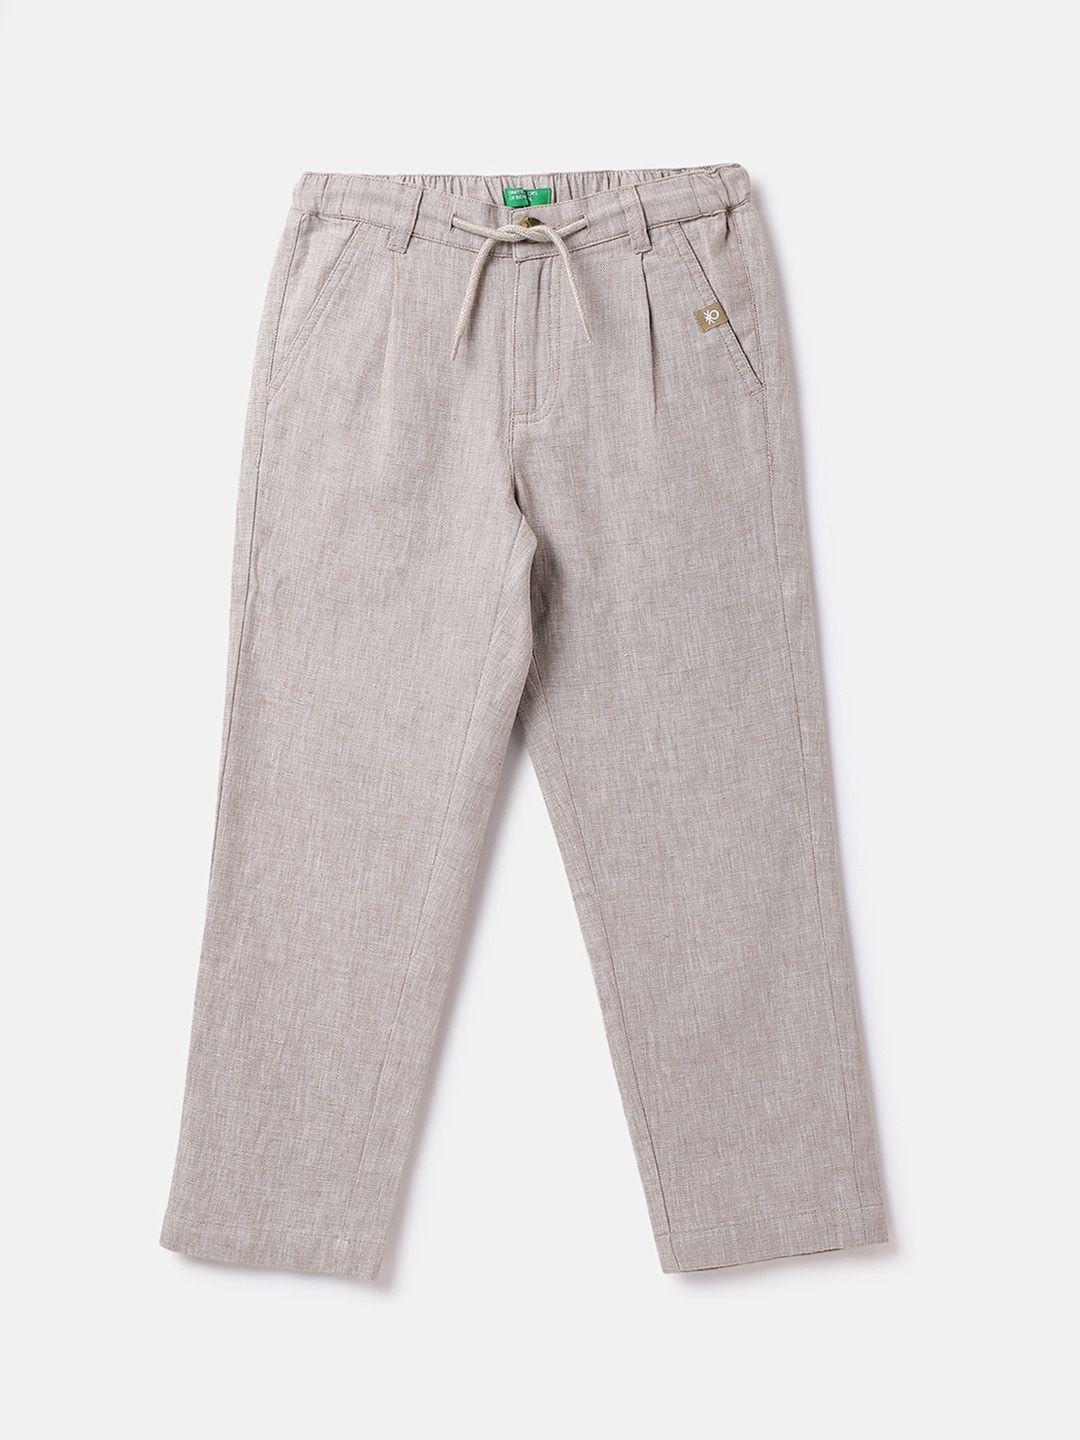 united colors of benetton boys mid rise pleated trousers